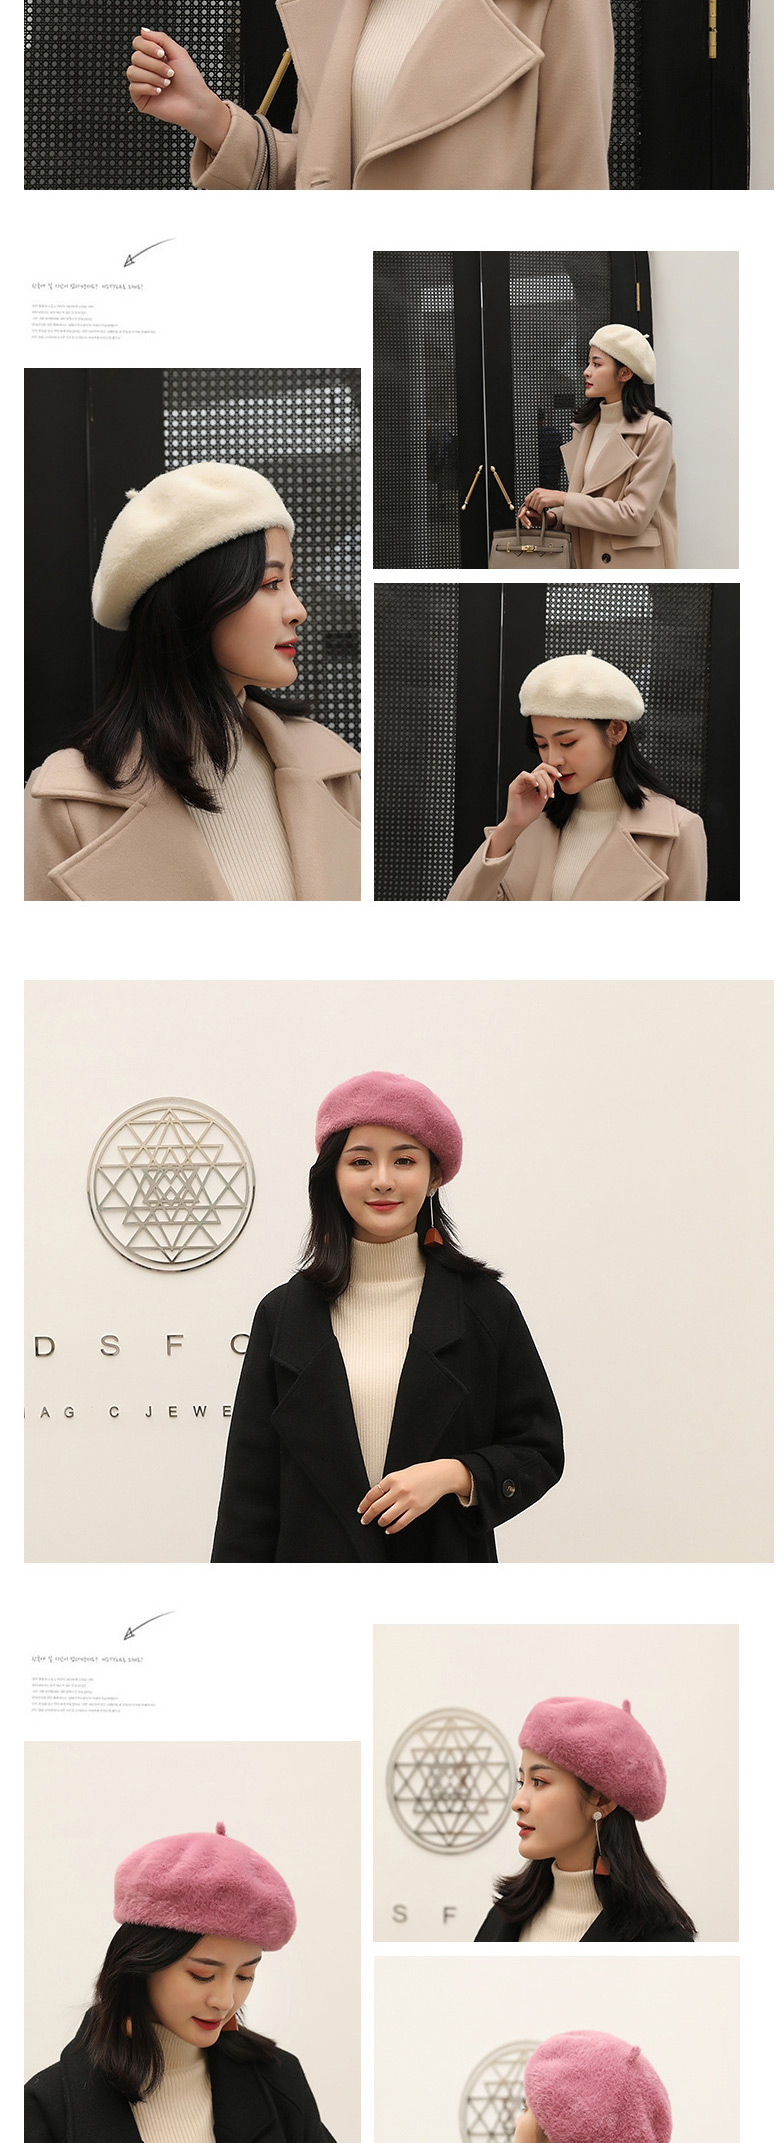 Fashion Leather Pink Faux Mink Pure Color Beret,Knitting Wool Hats